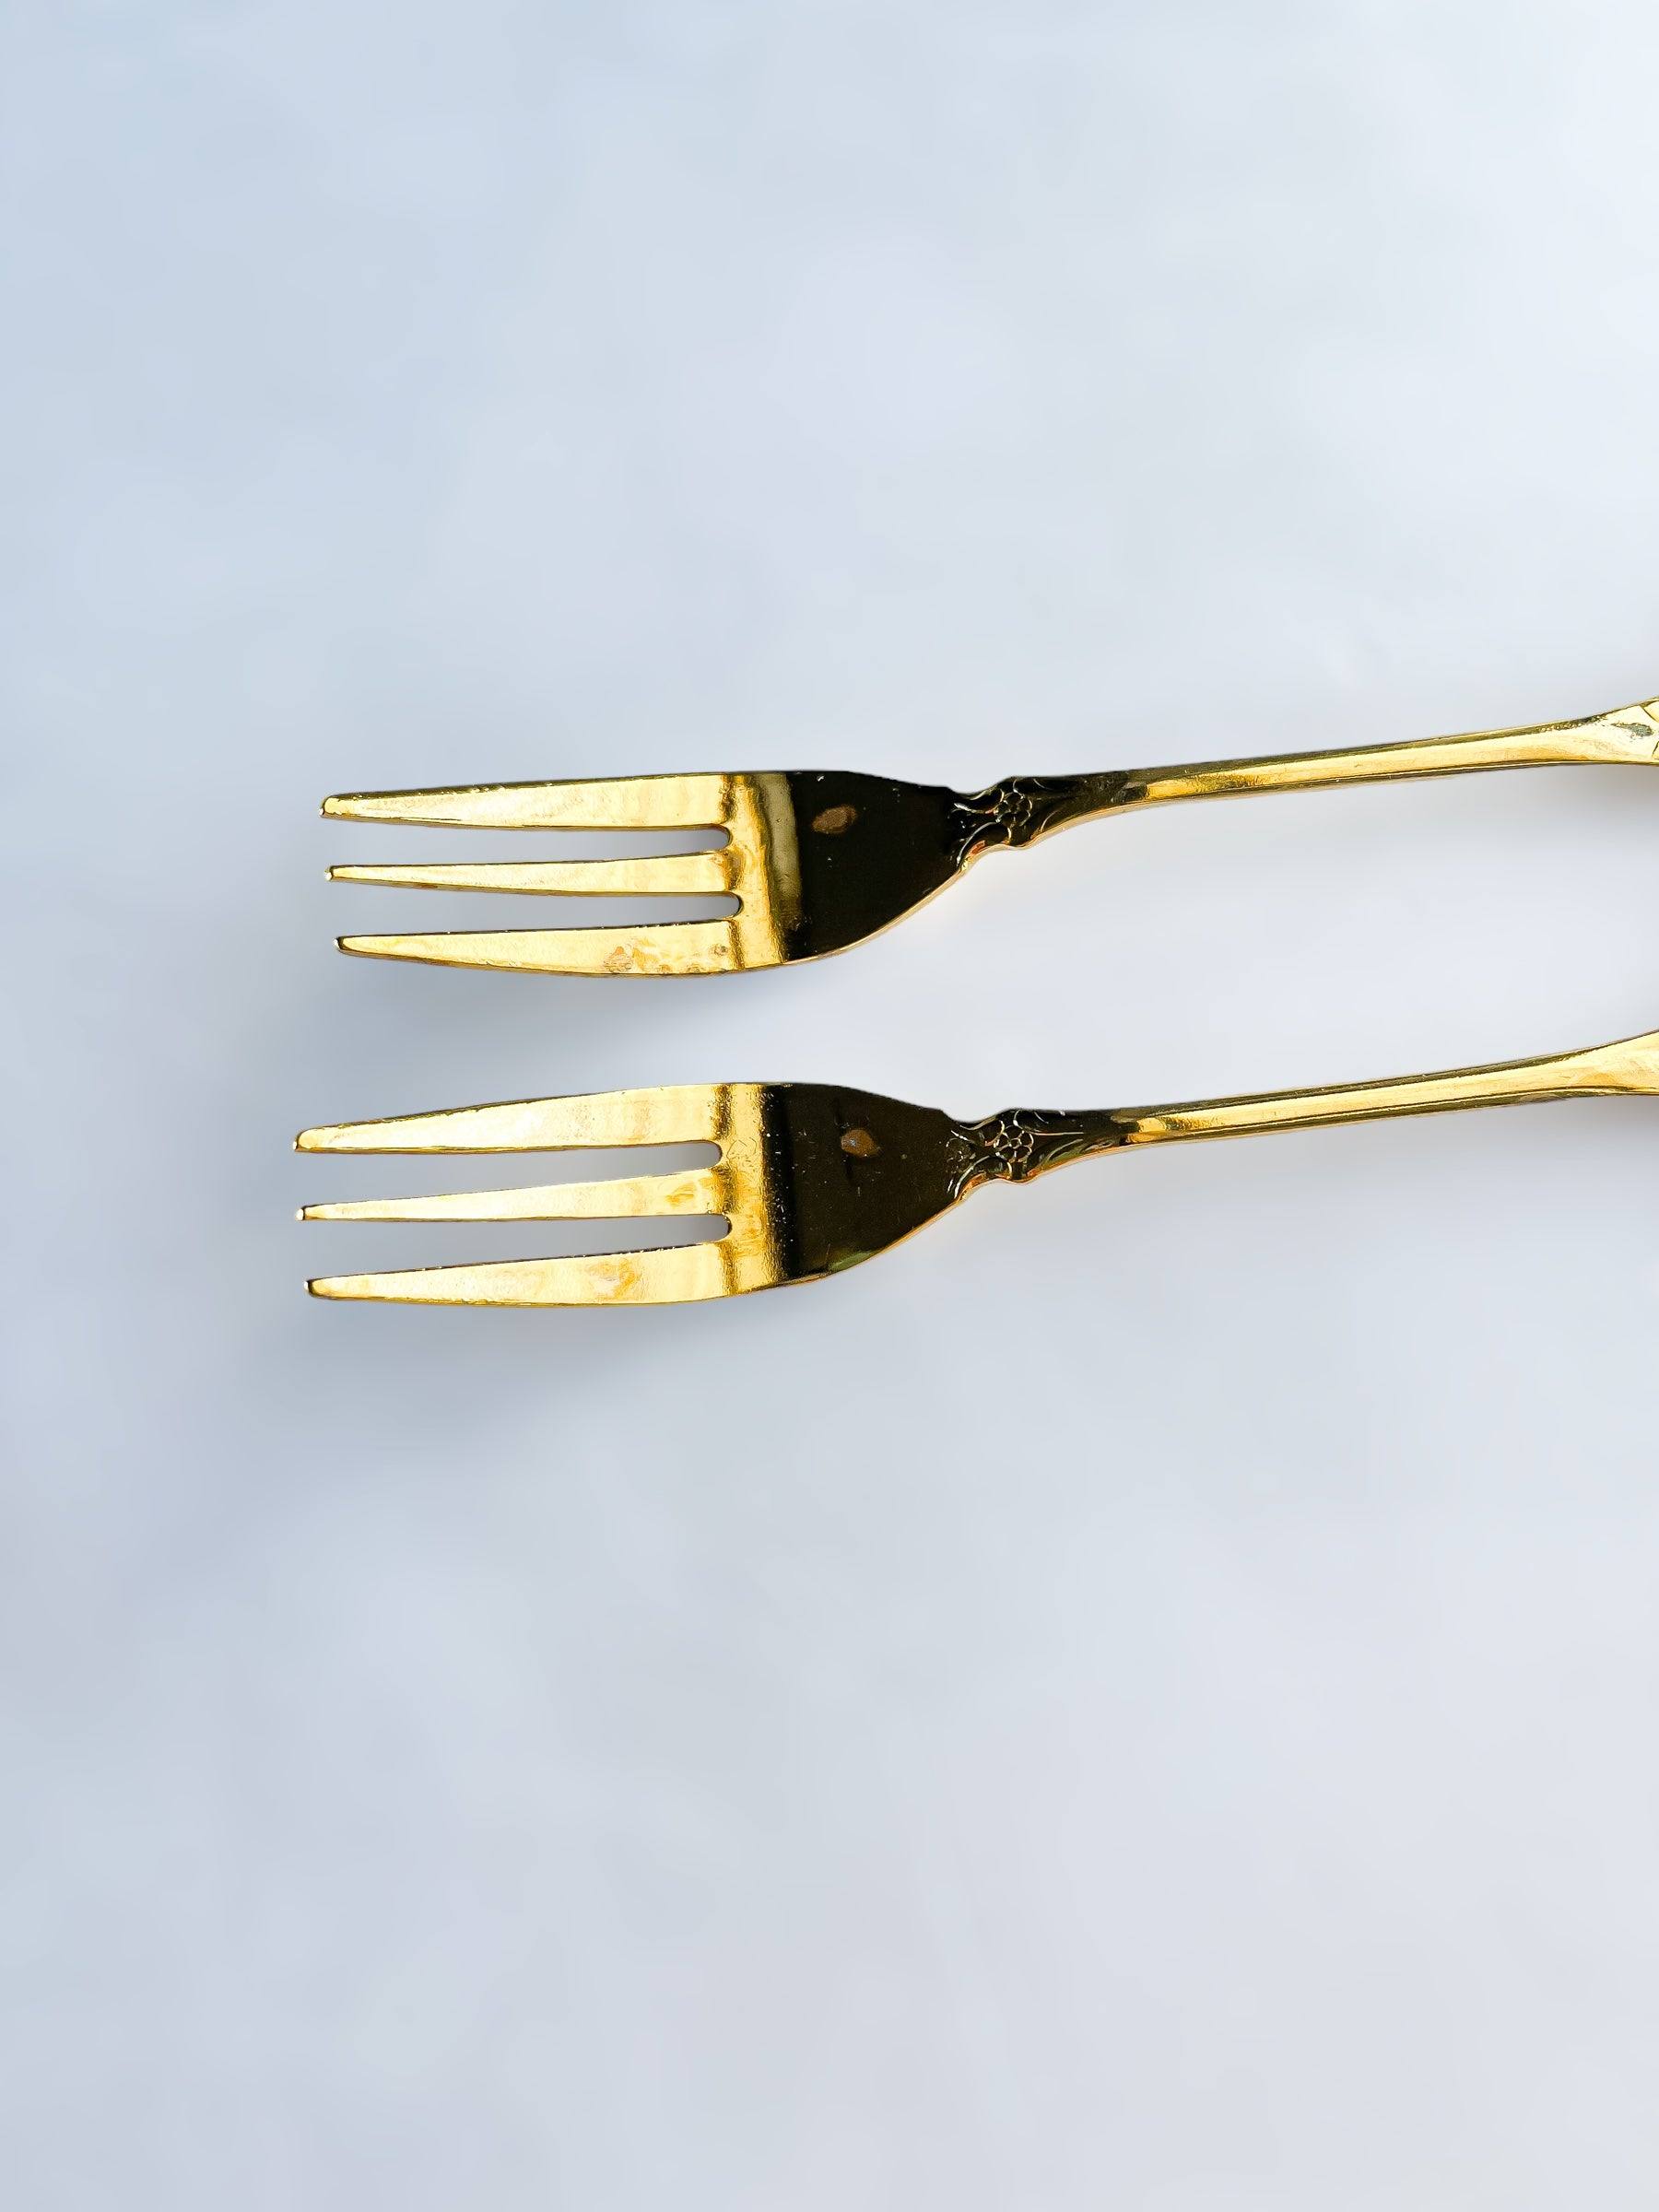 Greensons Set of 6 Gold-Plated Cake Forks - 'Pastel Rose' Collection - SOSC Home